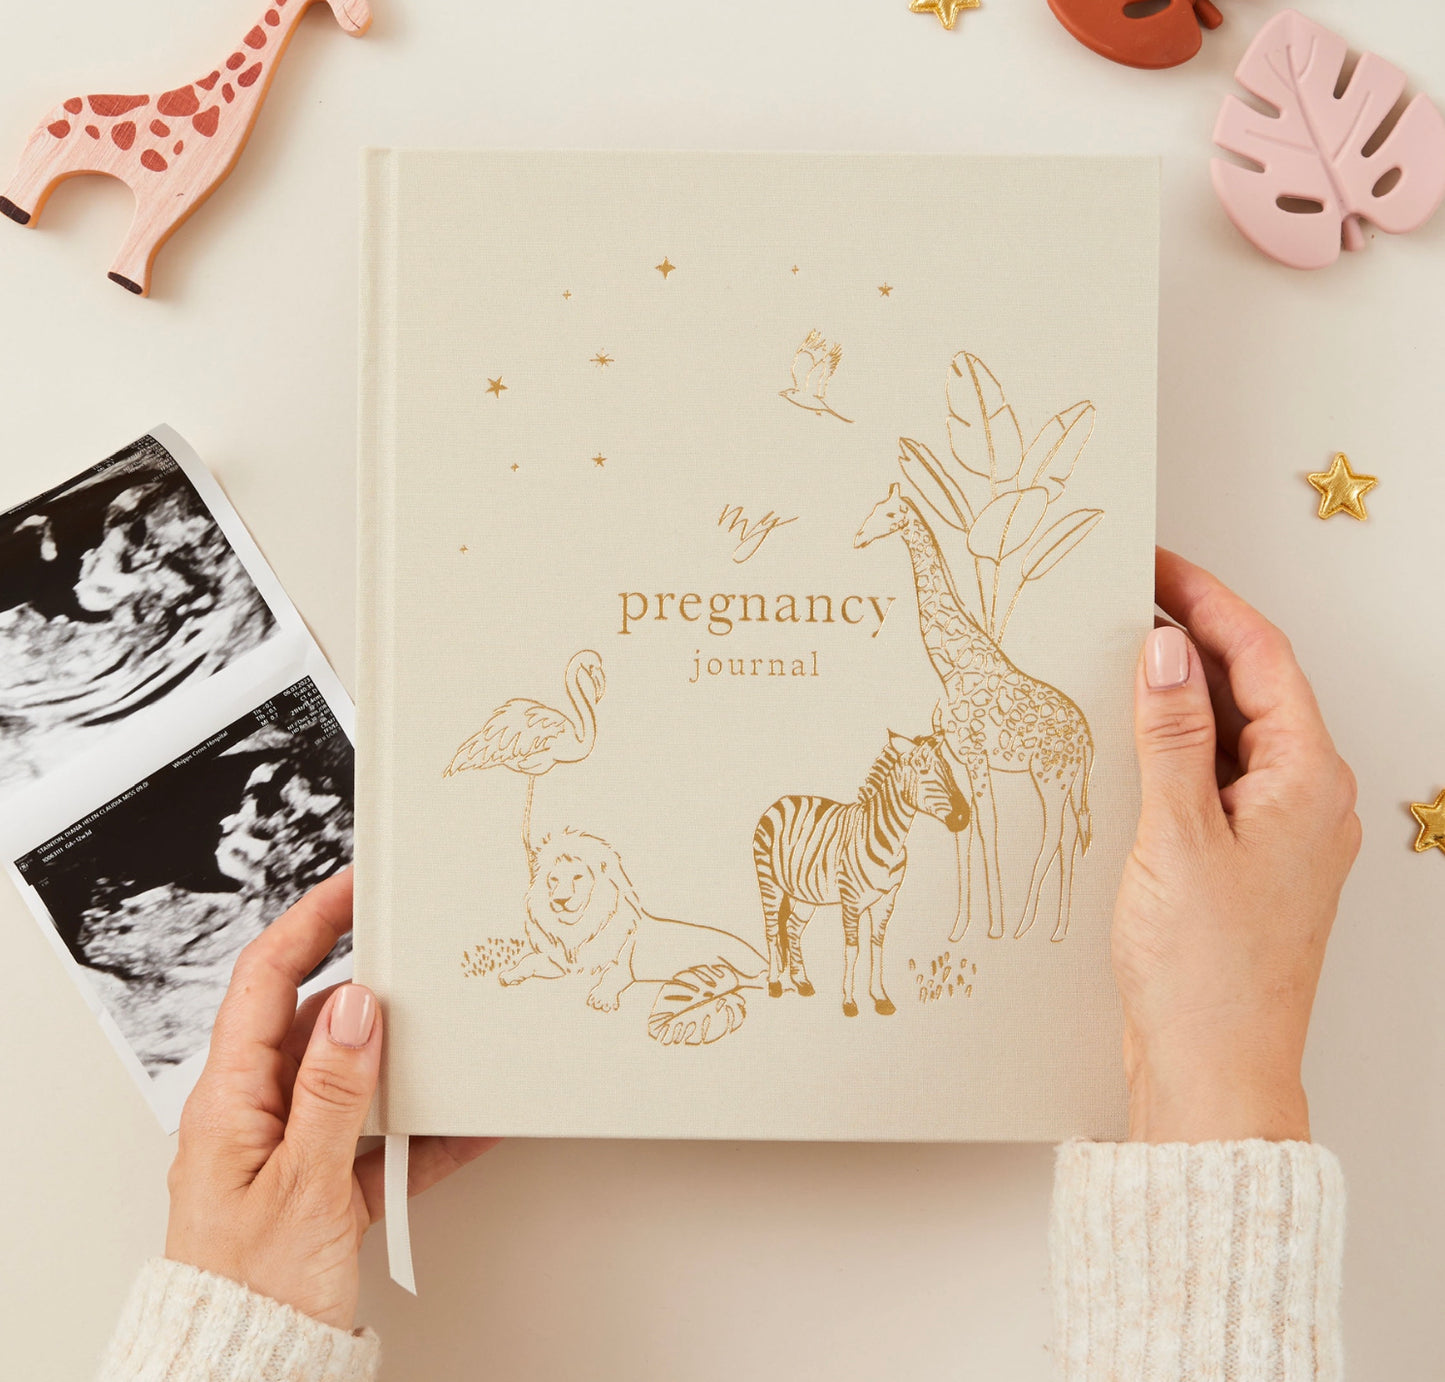 My Pregnancy Journal - Safari with Gilded Edges